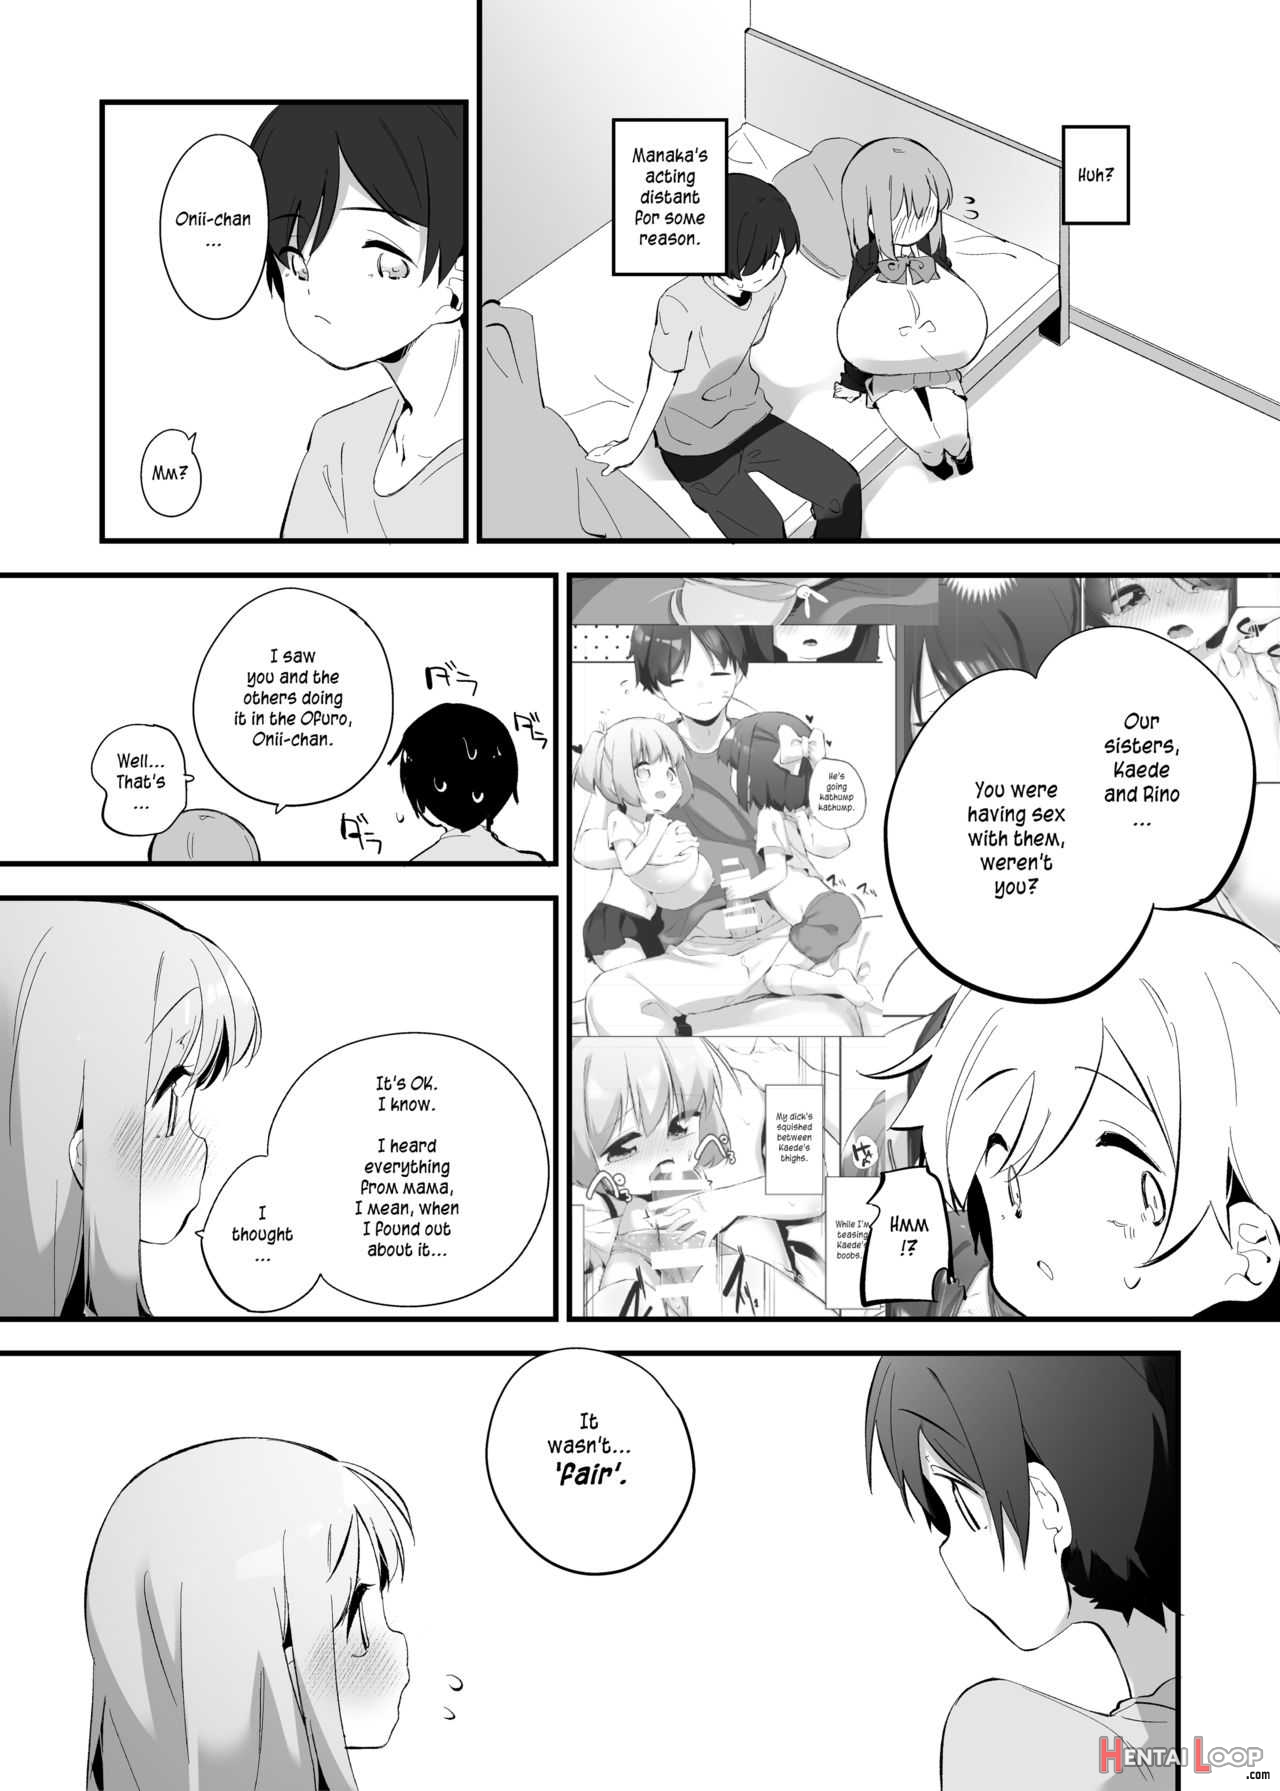 Between Sisters, Are You Happy? 2 page 4